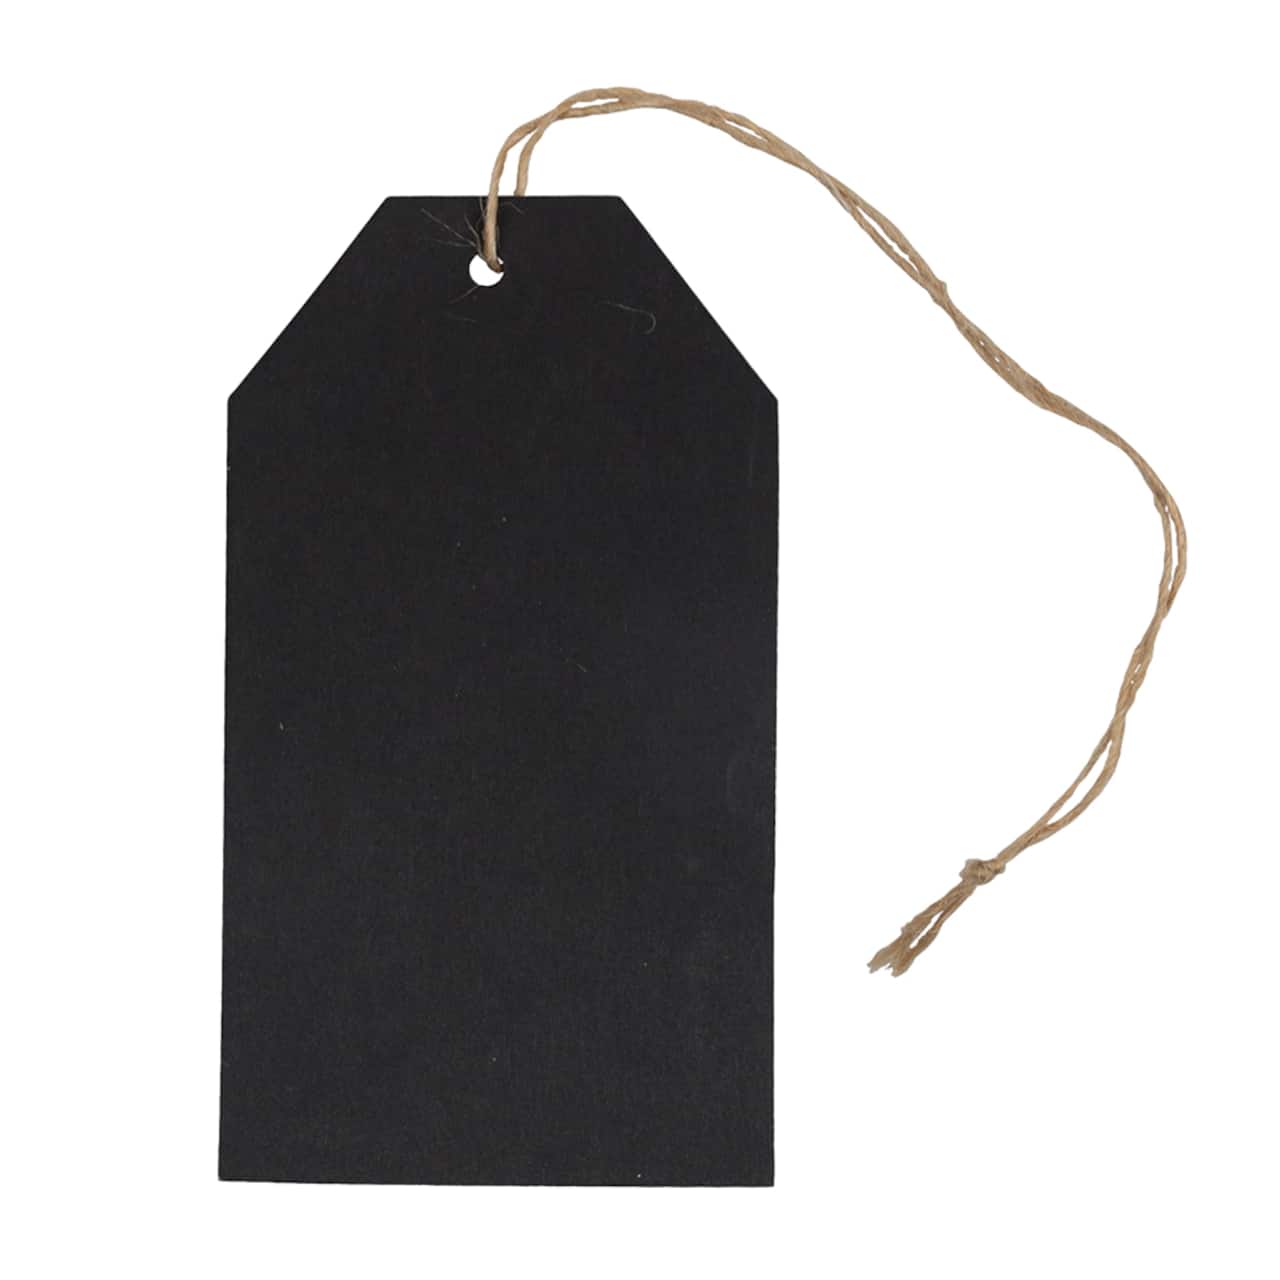 JAM Paper Black Recycled Kraft Premium Gift Tags with Twine String, 10ct.